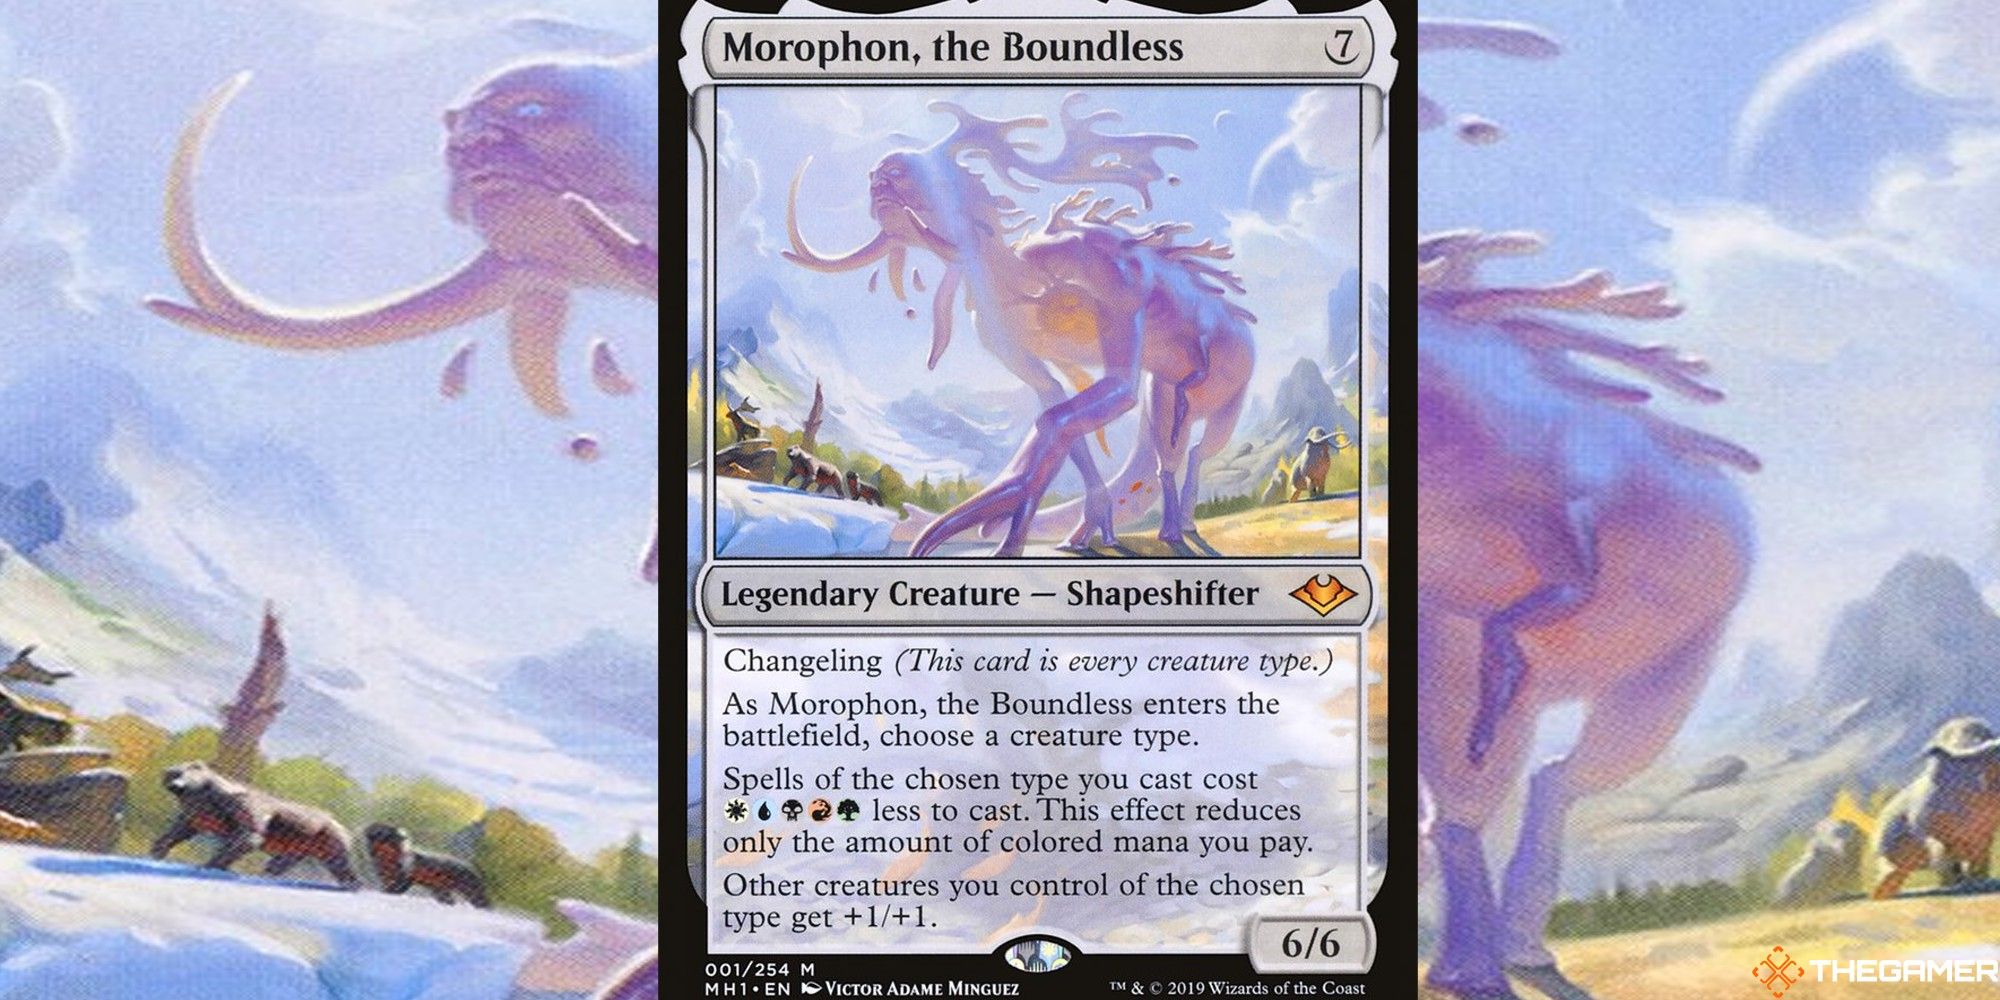 Morophon, the boundless card and artwork in Magic: The Gathering.